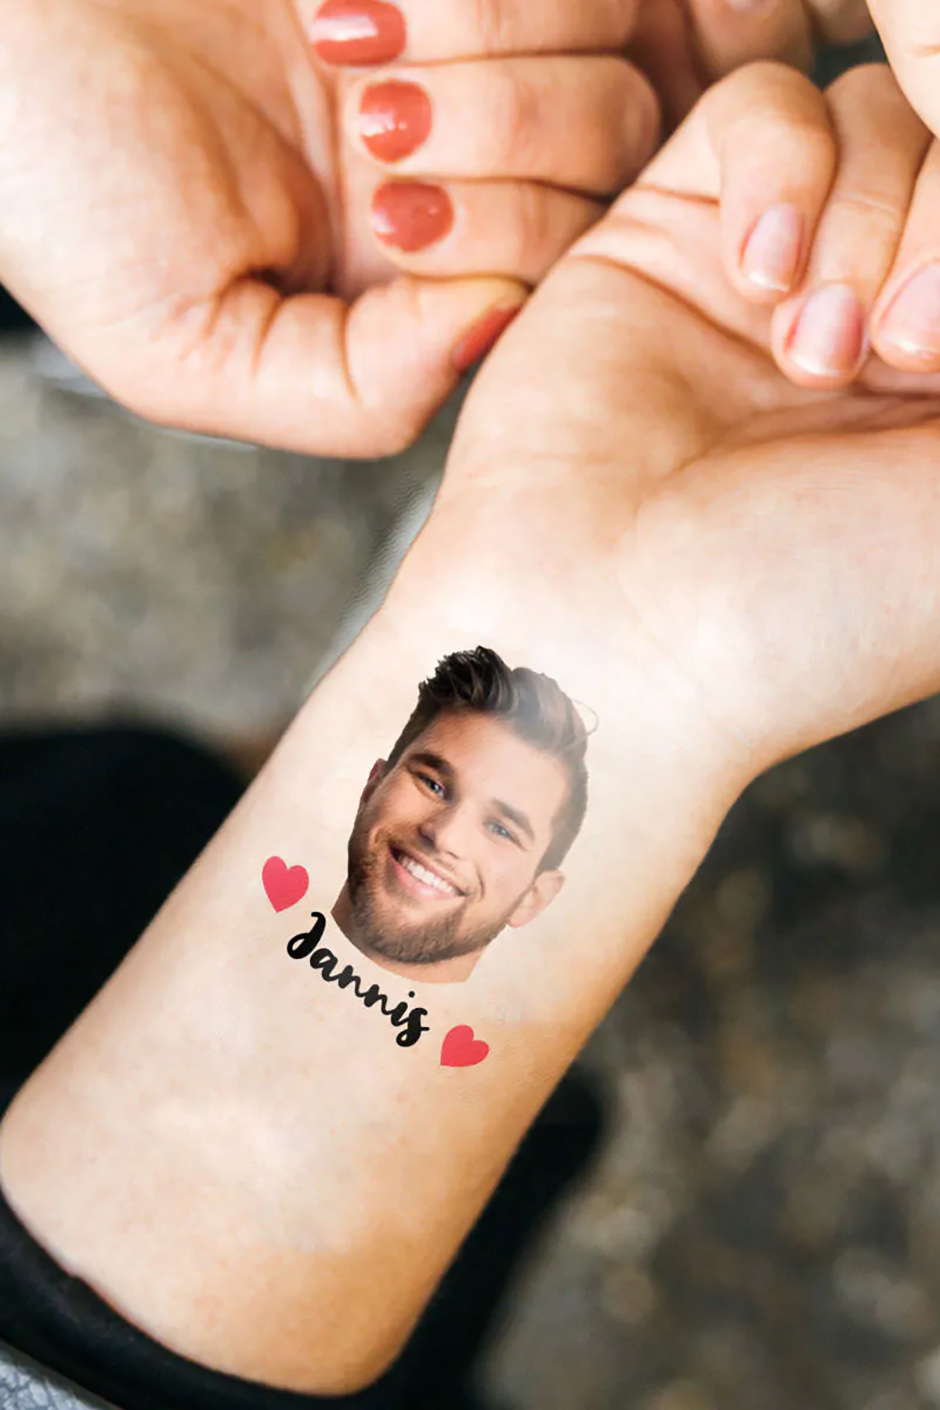 Personalised tempoary tattoo with man's face and name as party joke